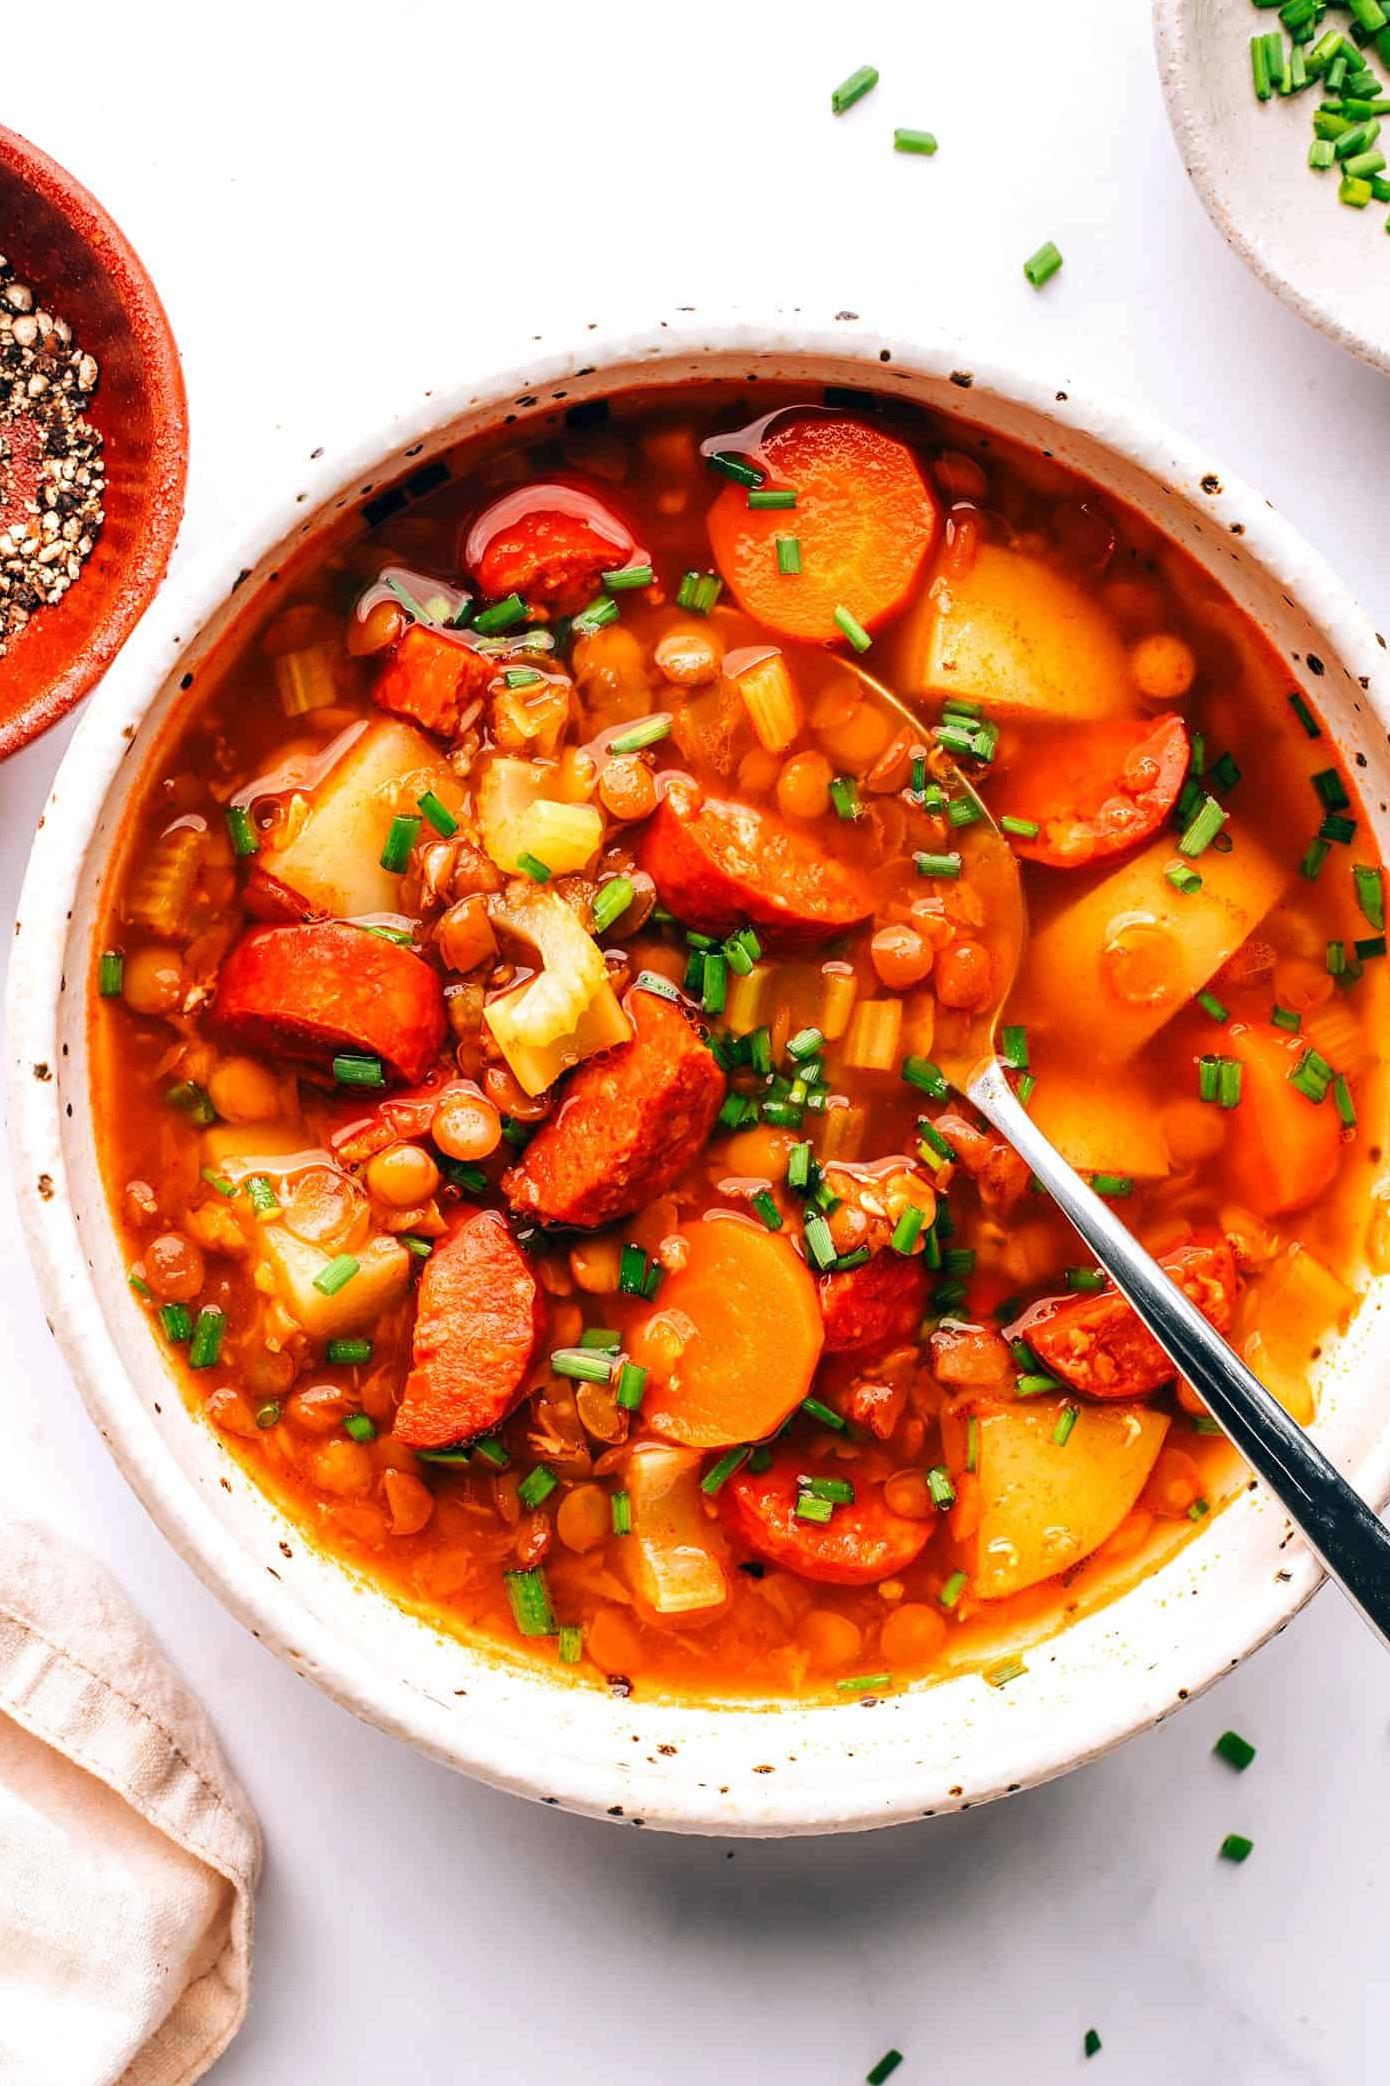  A bowl of warm Basque chorizo and lentil soup, the perfect comfort food.